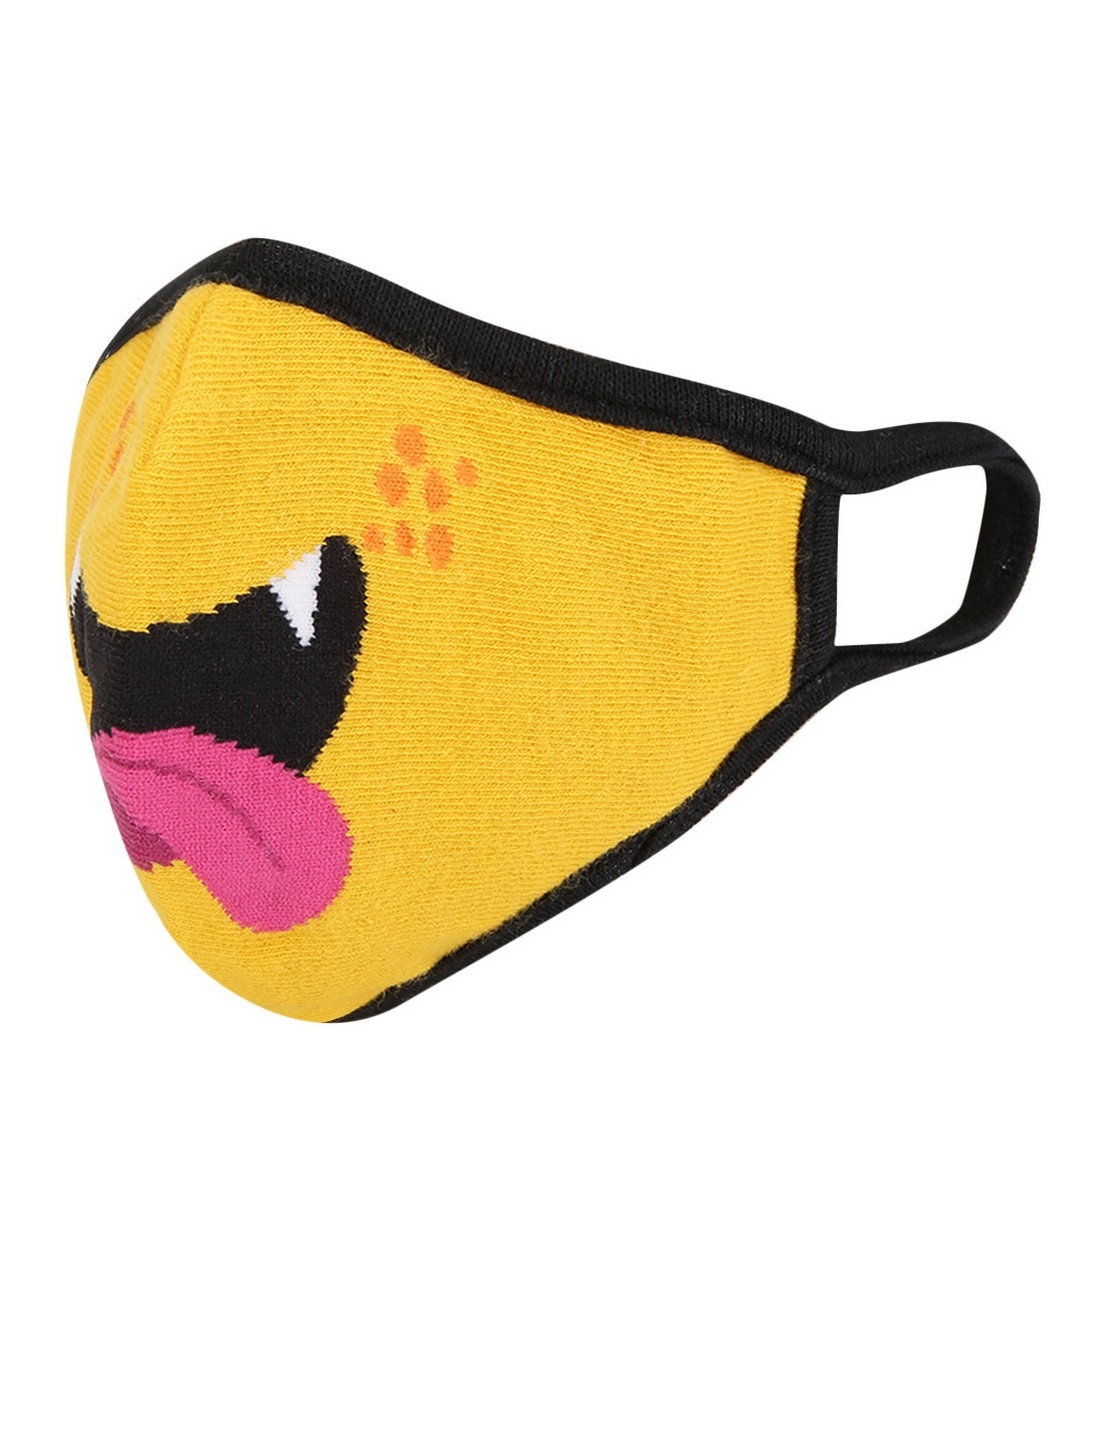 Soxytoes | Soxytoes Yellow Monster Stylish Protective Super Safe Washable Knitted Cotton Kid's Face Mask 1